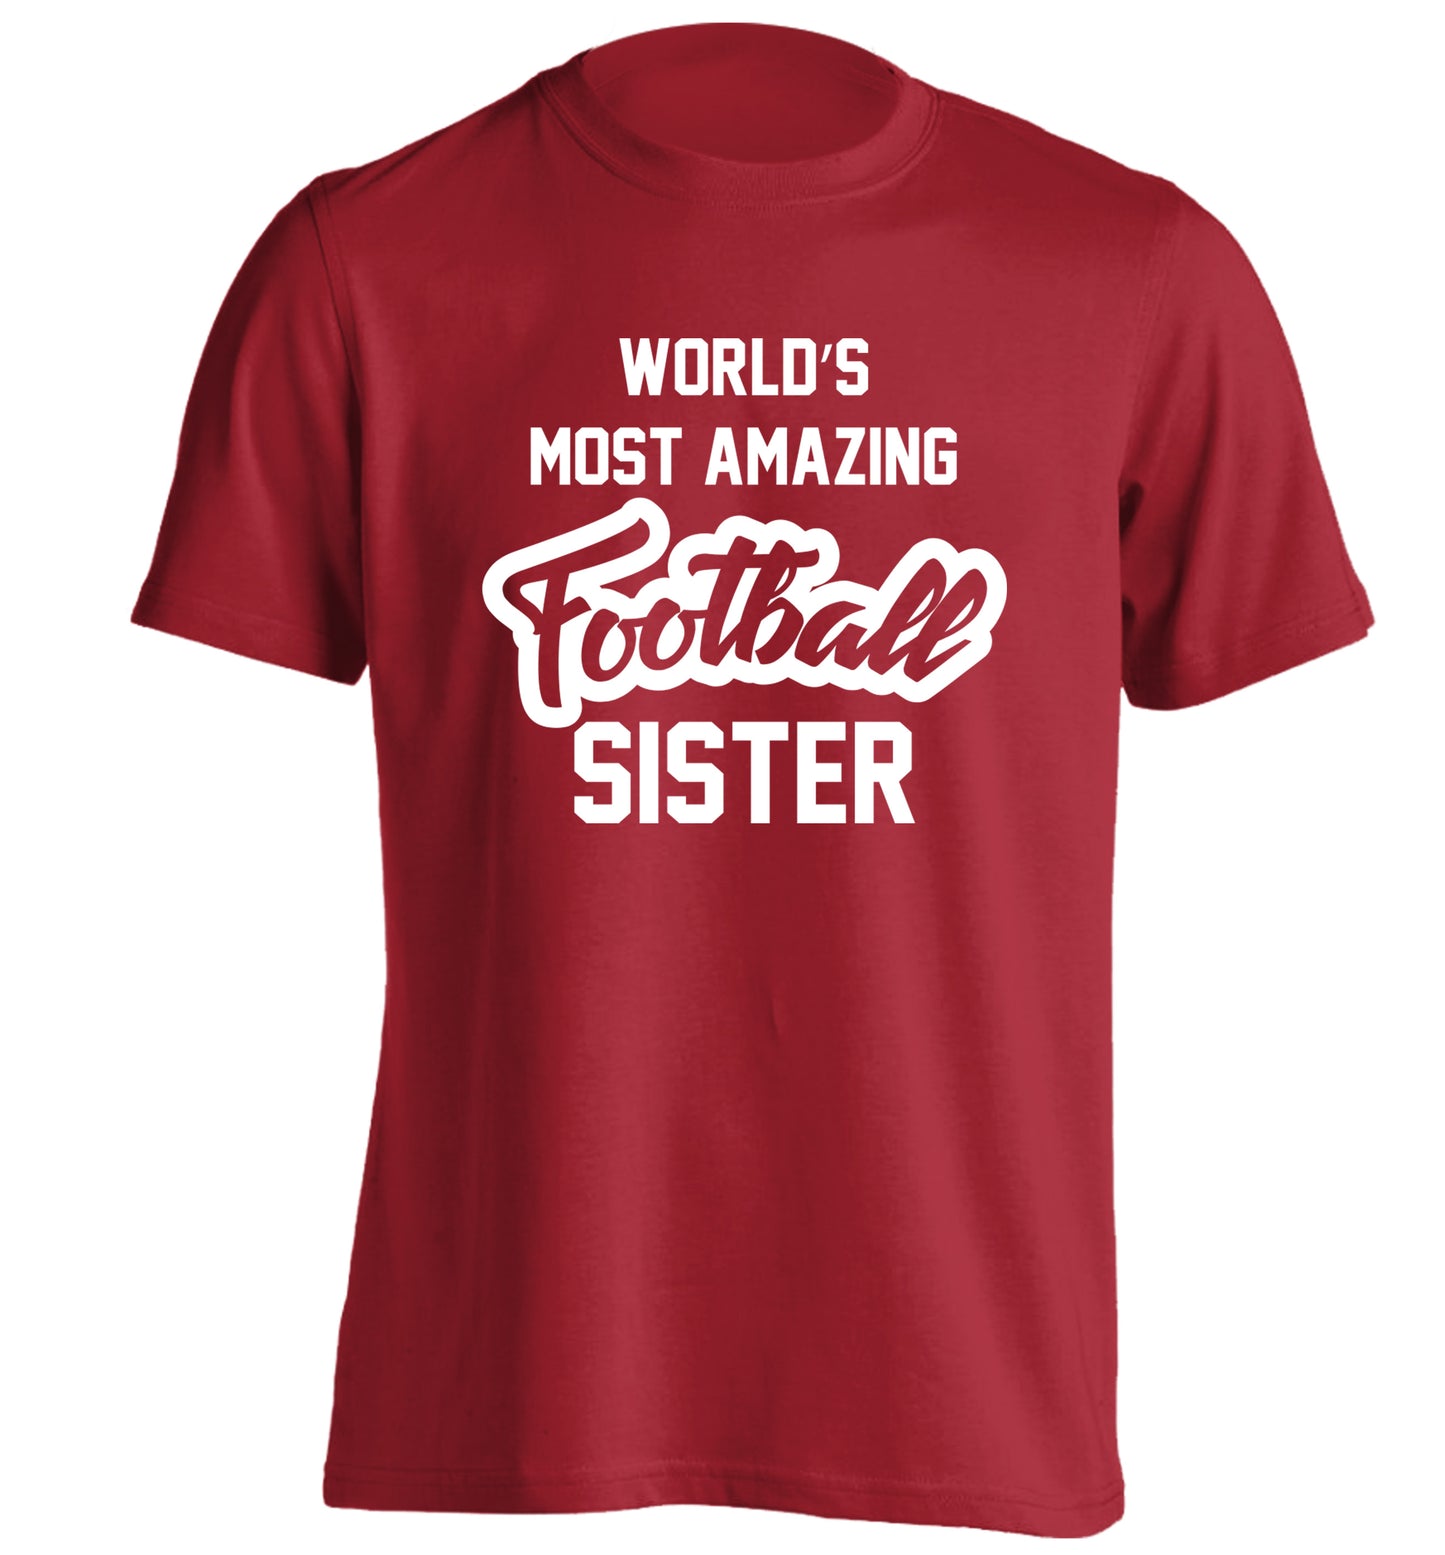 Worlds most amazing football sister adults unisexred Tshirt 2XL